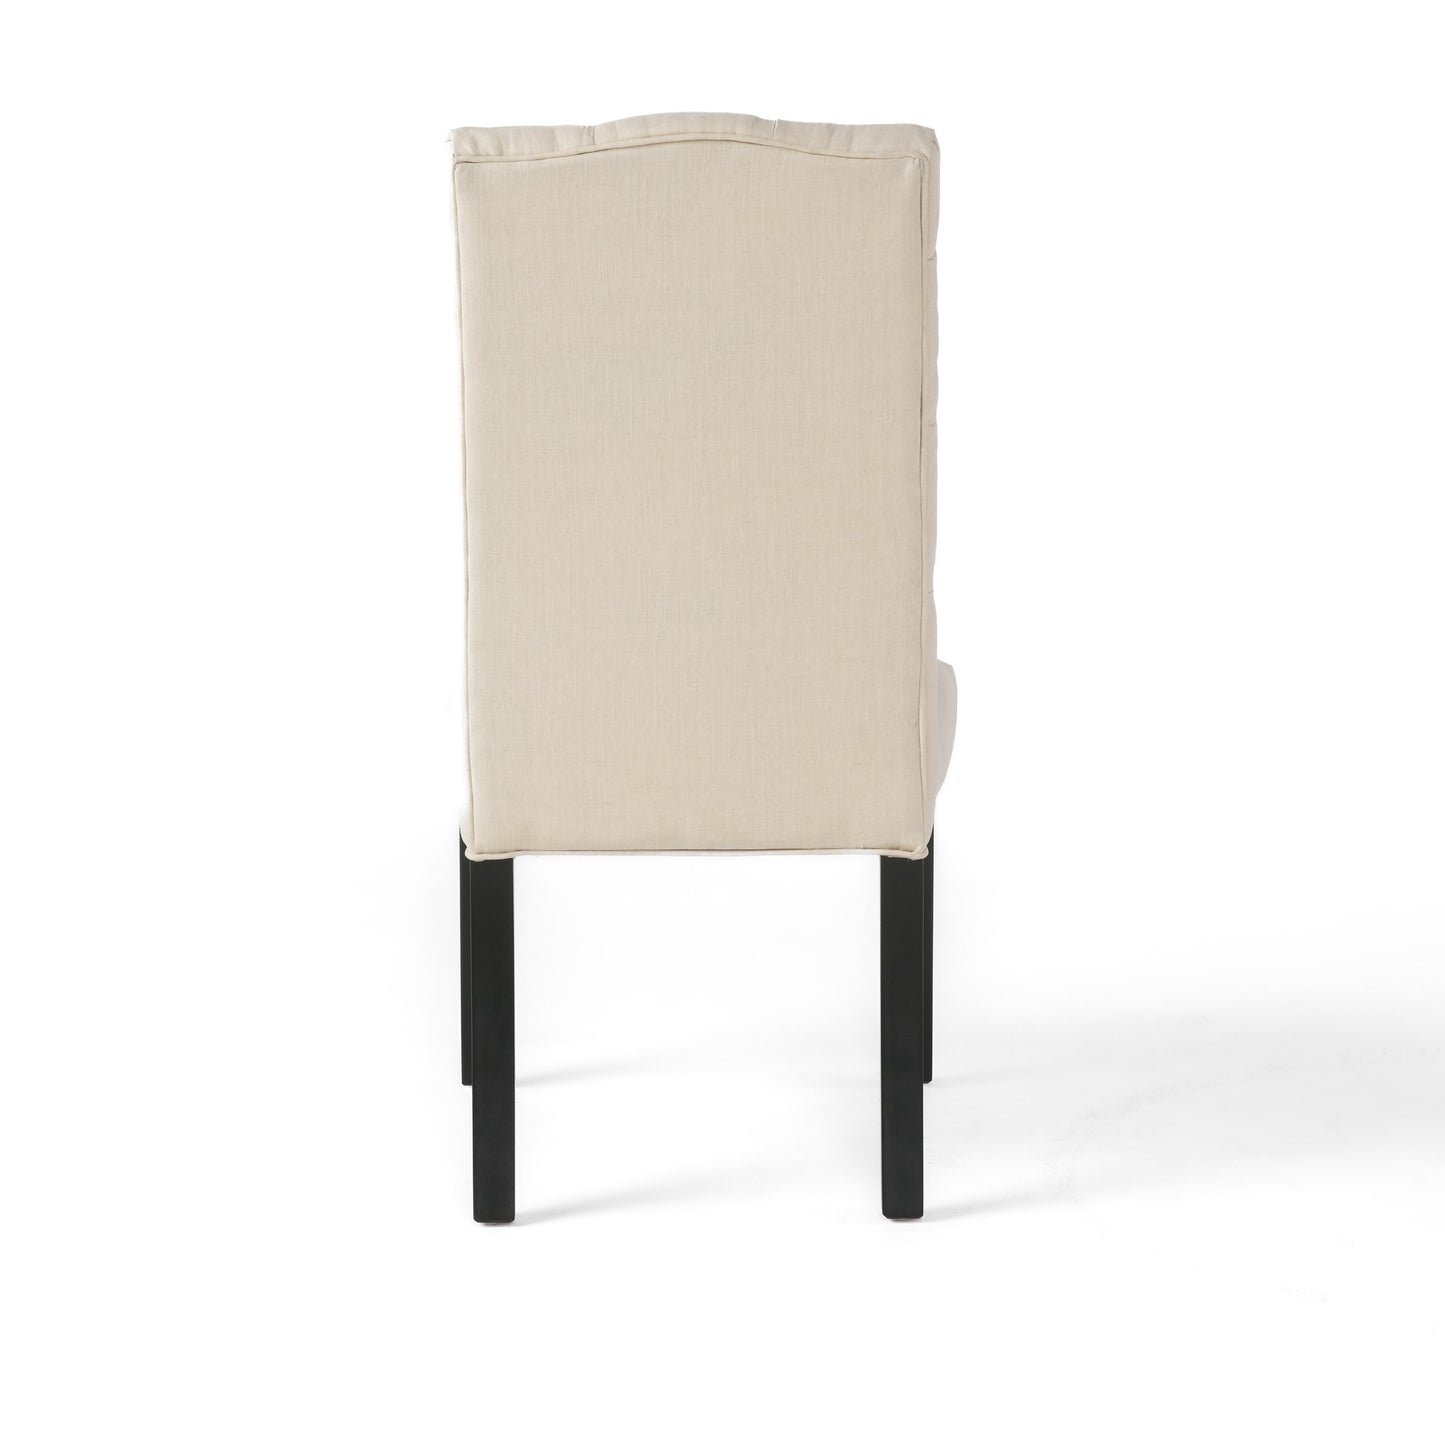 Prince Tufted Natural Plain Fabric Dining Chair (Set of 2)